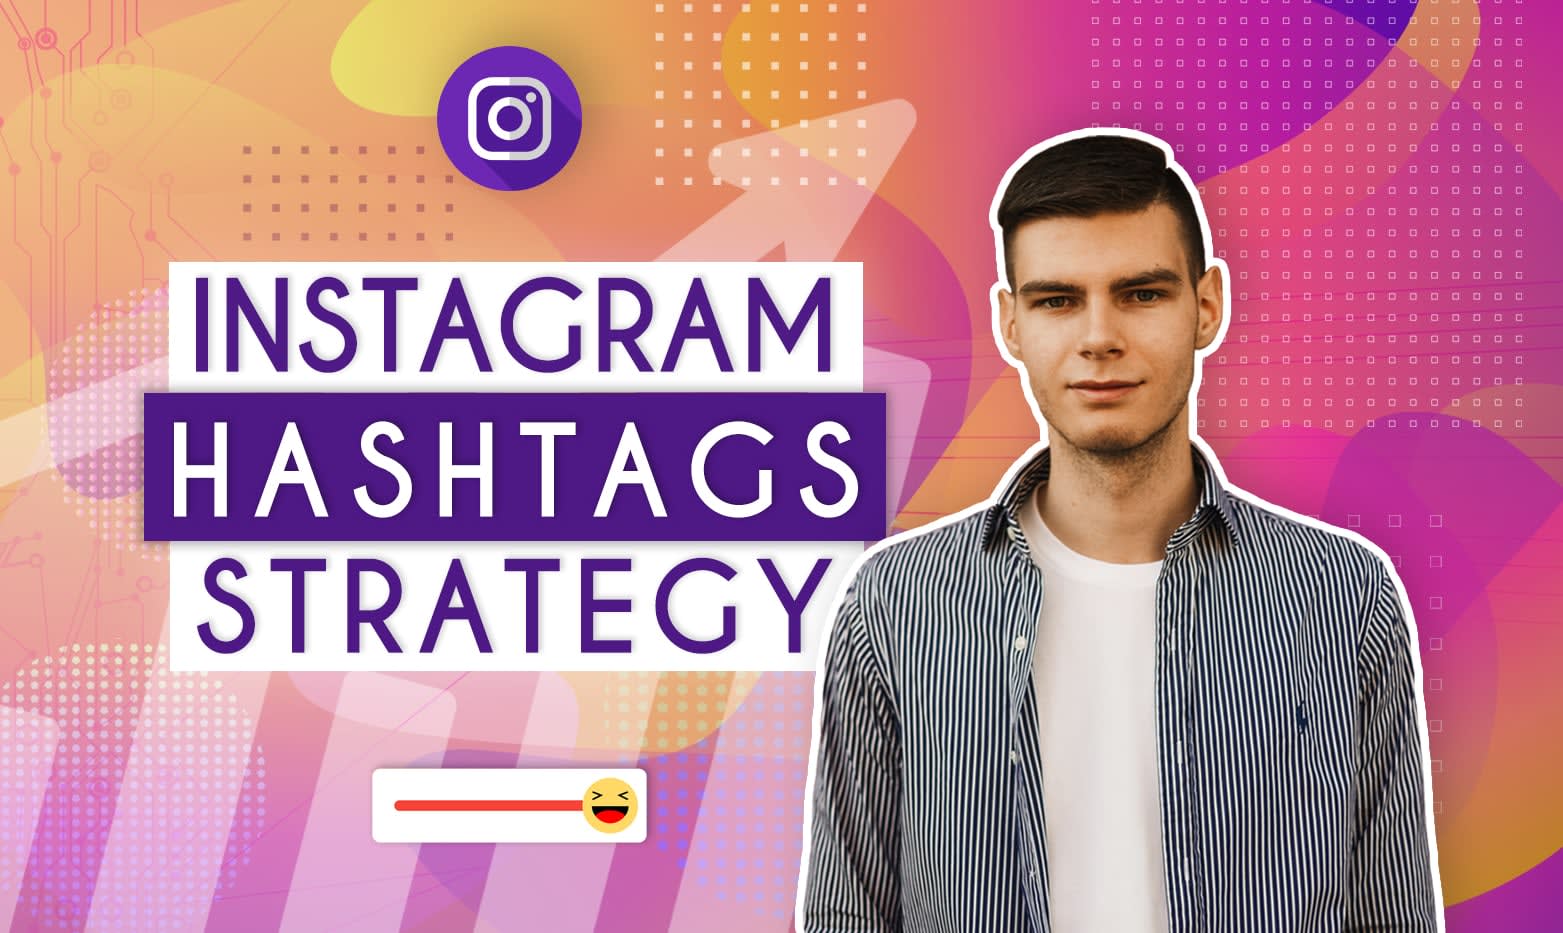 I will research hashtags to grow your instagram organically